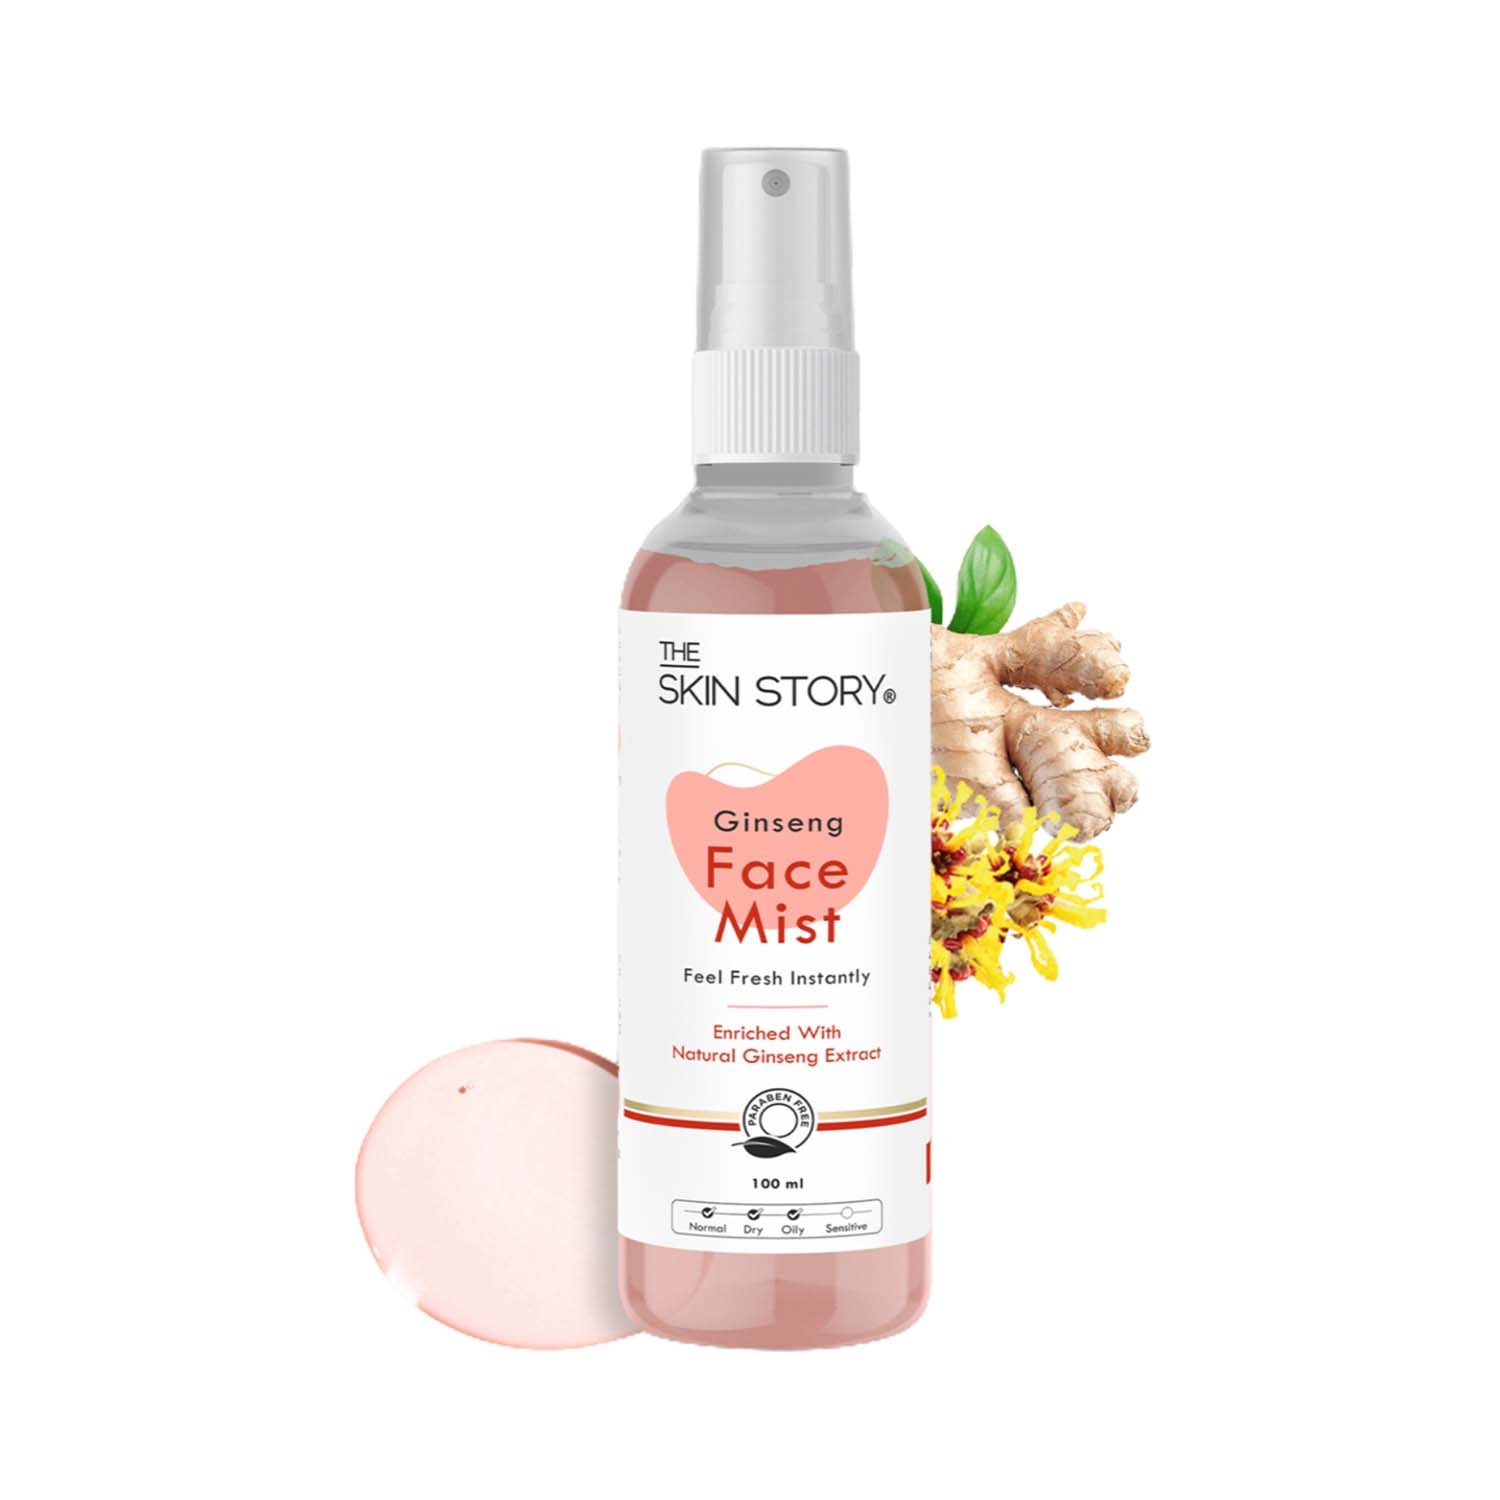 The Skin Story | The Skin Story Ginseng Face Mist (100ml)